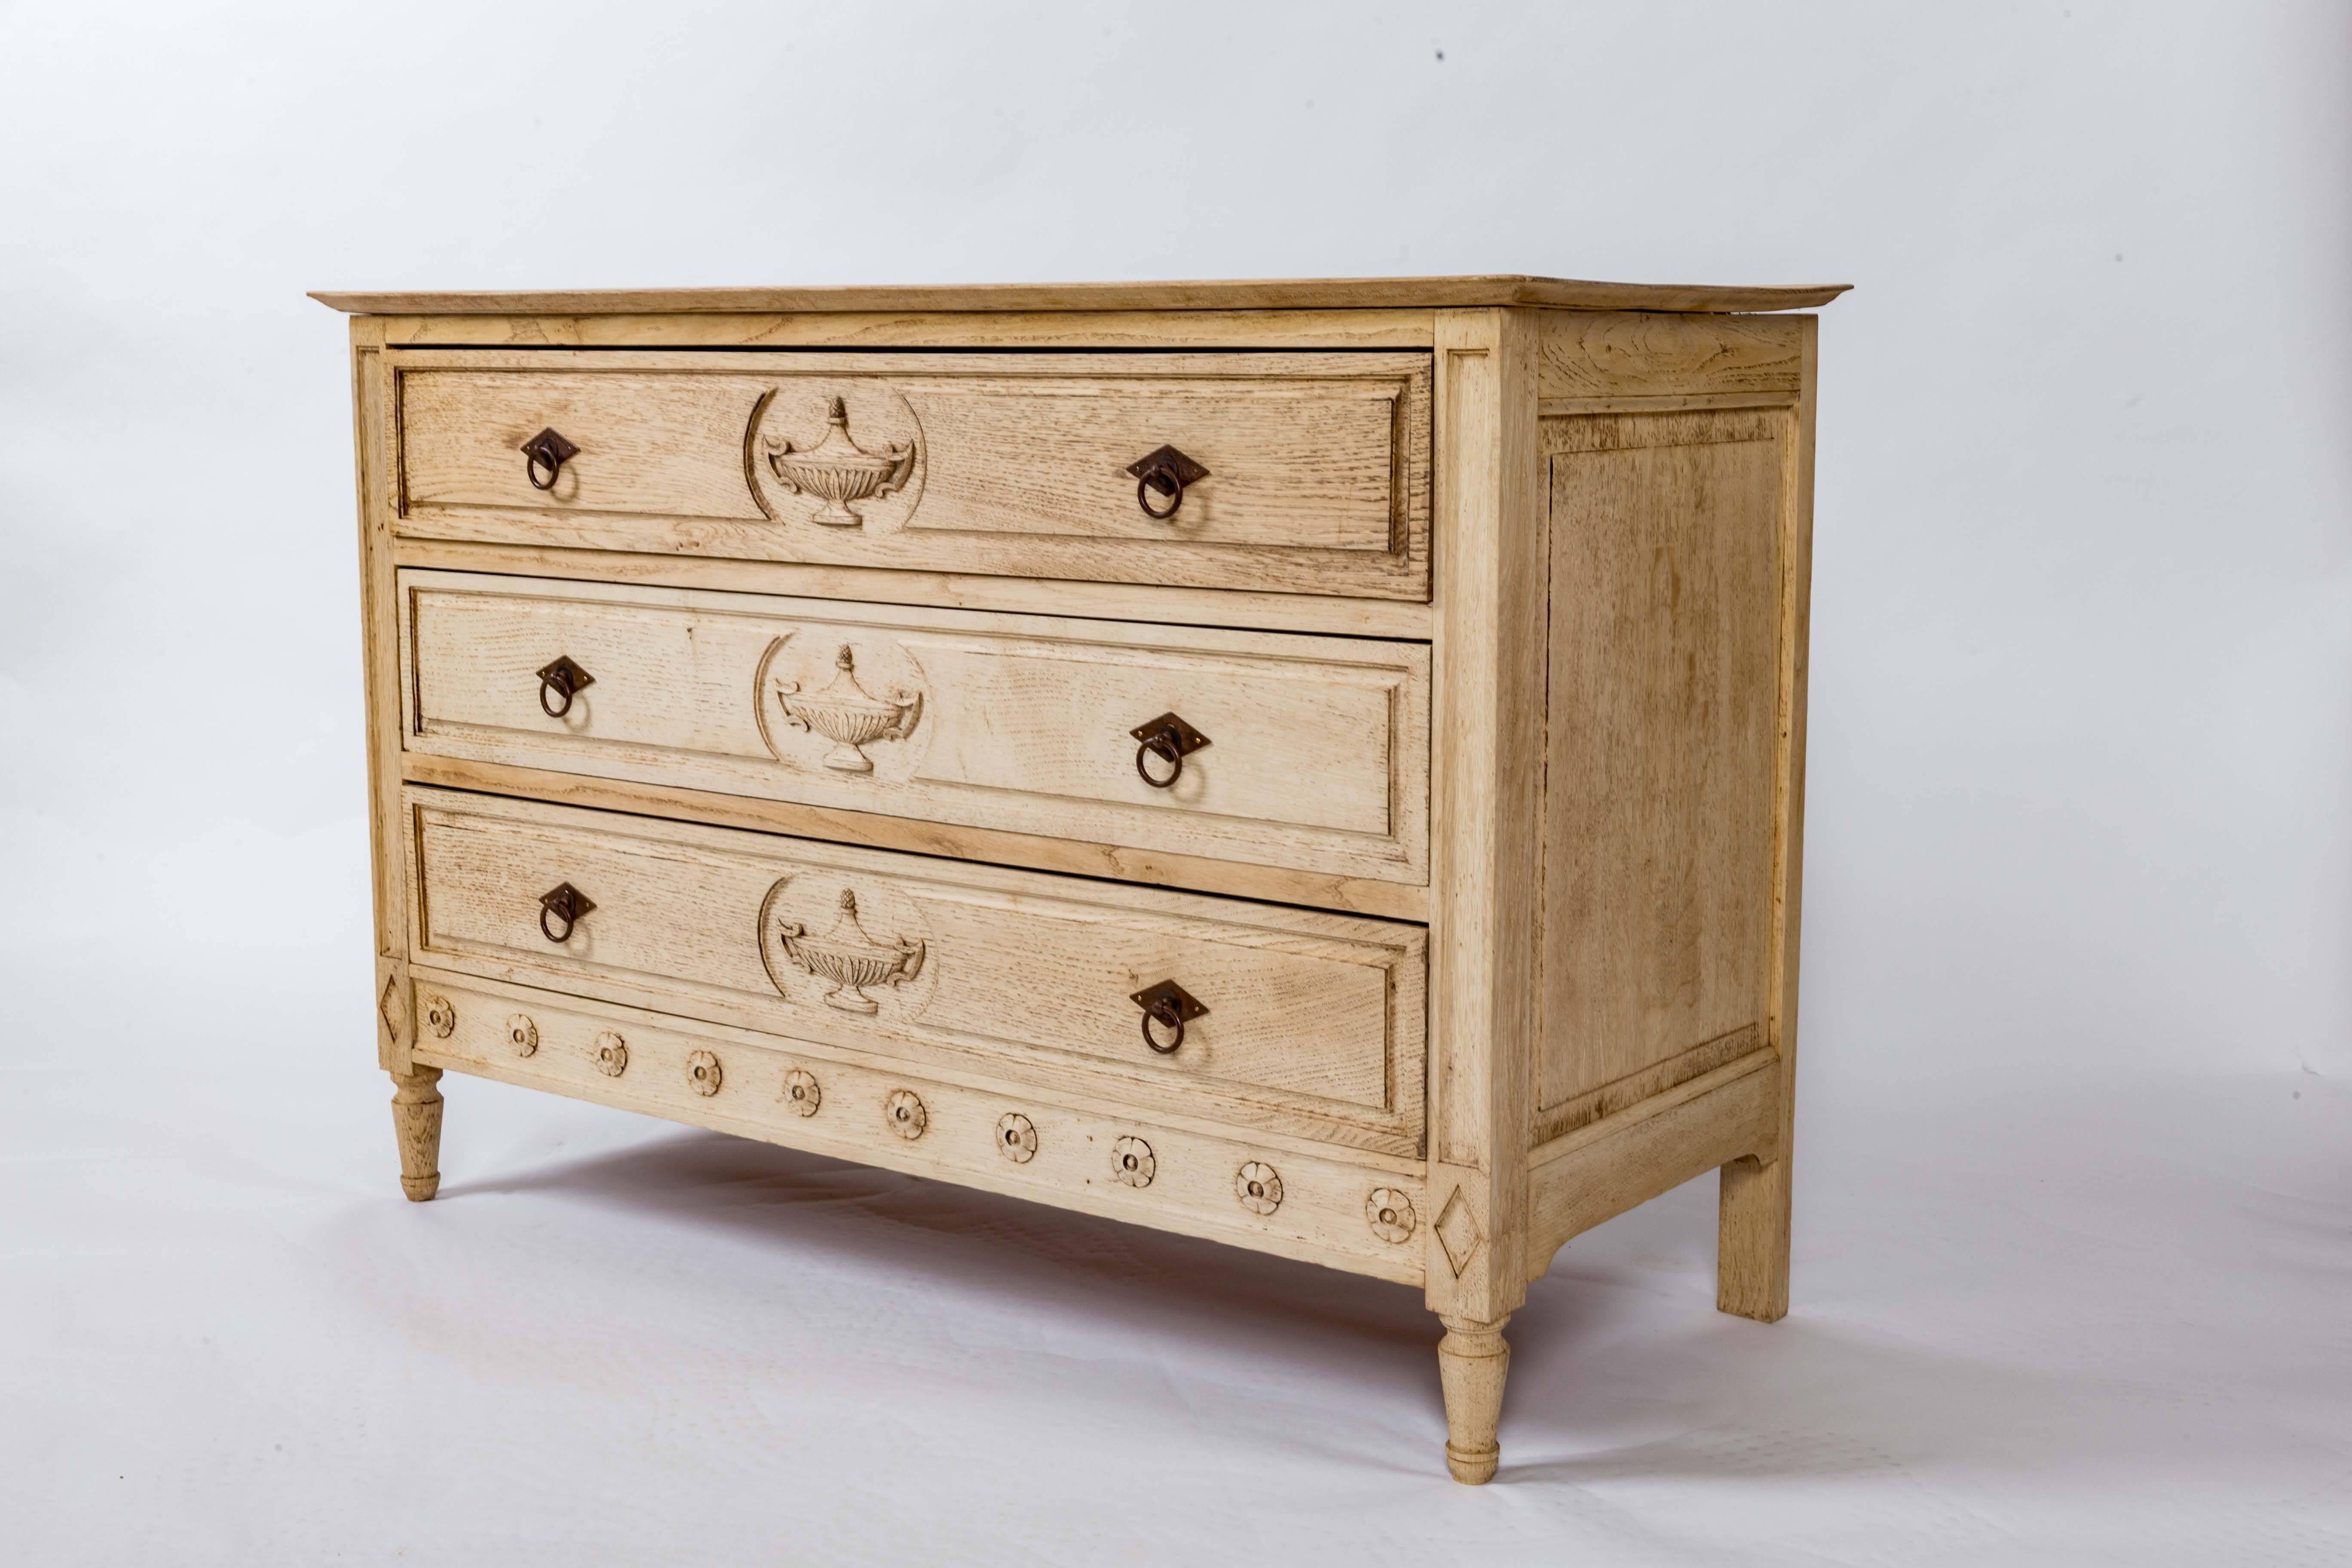 Three-drawers with iron pulls, neoclassical carved urns and carved rosettes on skirt. Fielded panel side and turned feet.